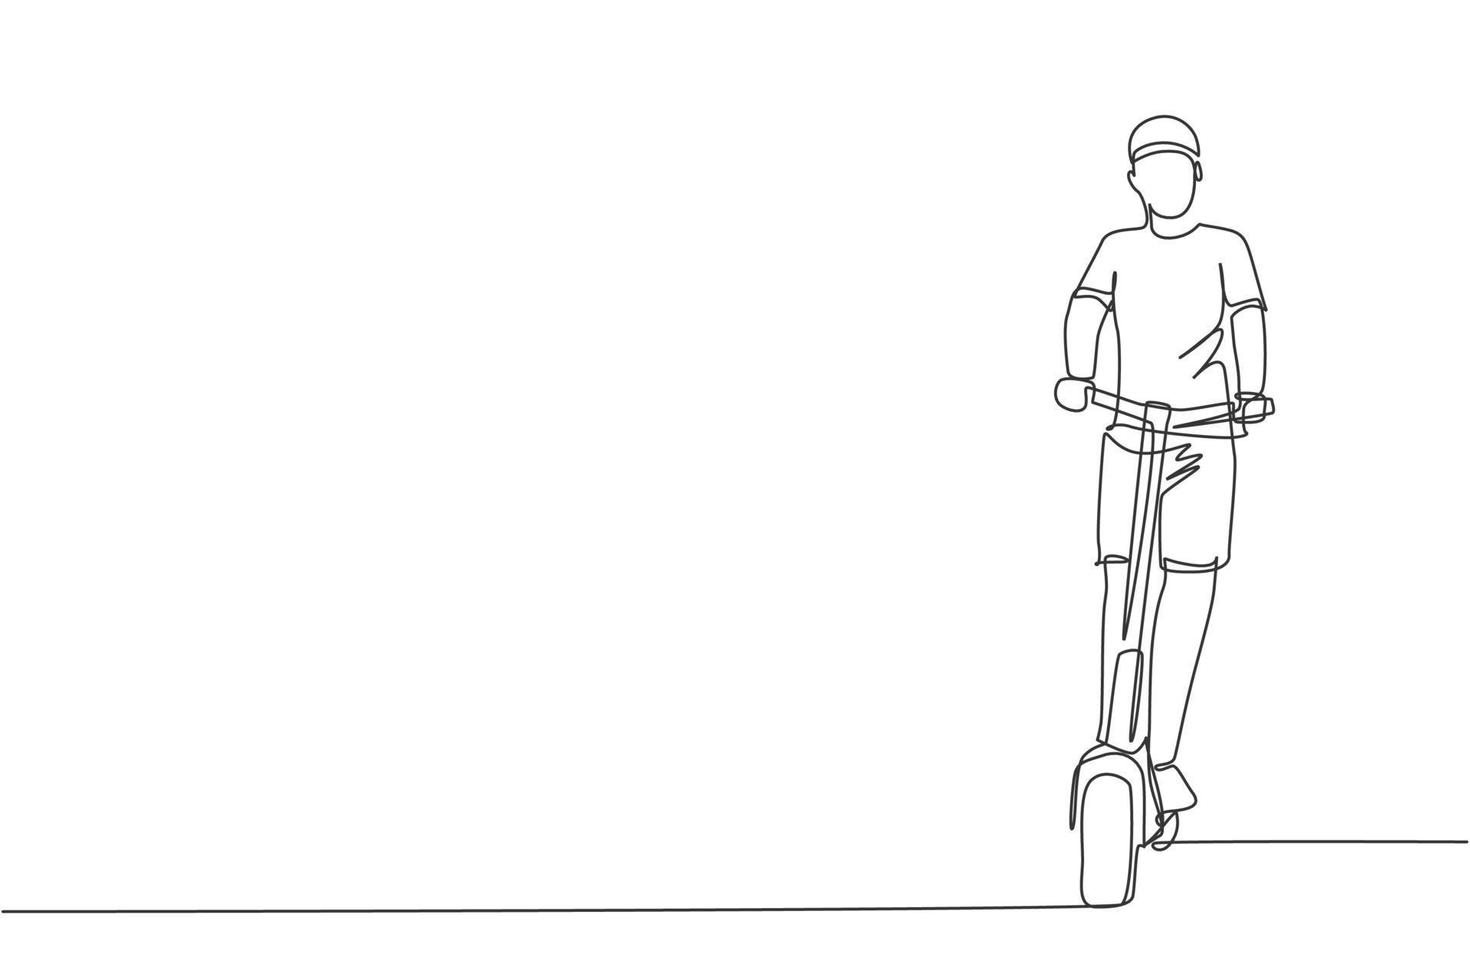 One single line drawing of young energetic man riding electric scooter at city park vector graphic illustration. Future transport. Healthy lifestyle sport concept. Modern continuous line draw design